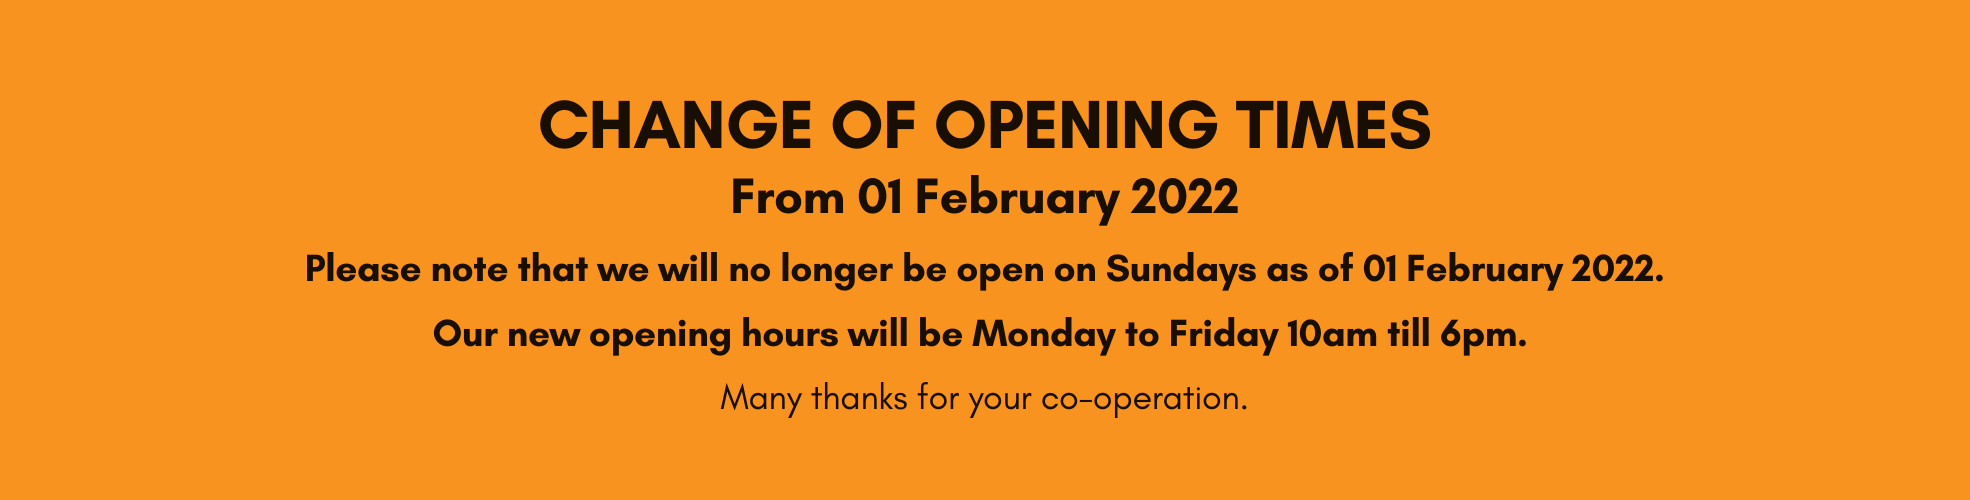 Change of opening times
From 01 February 2022
Please note that we will no longer be open on Sundays as of 01 February, 2022.
Our new opening hours will be Monday to Friday 10am till 6pm.
Many thanks for your co-operation.